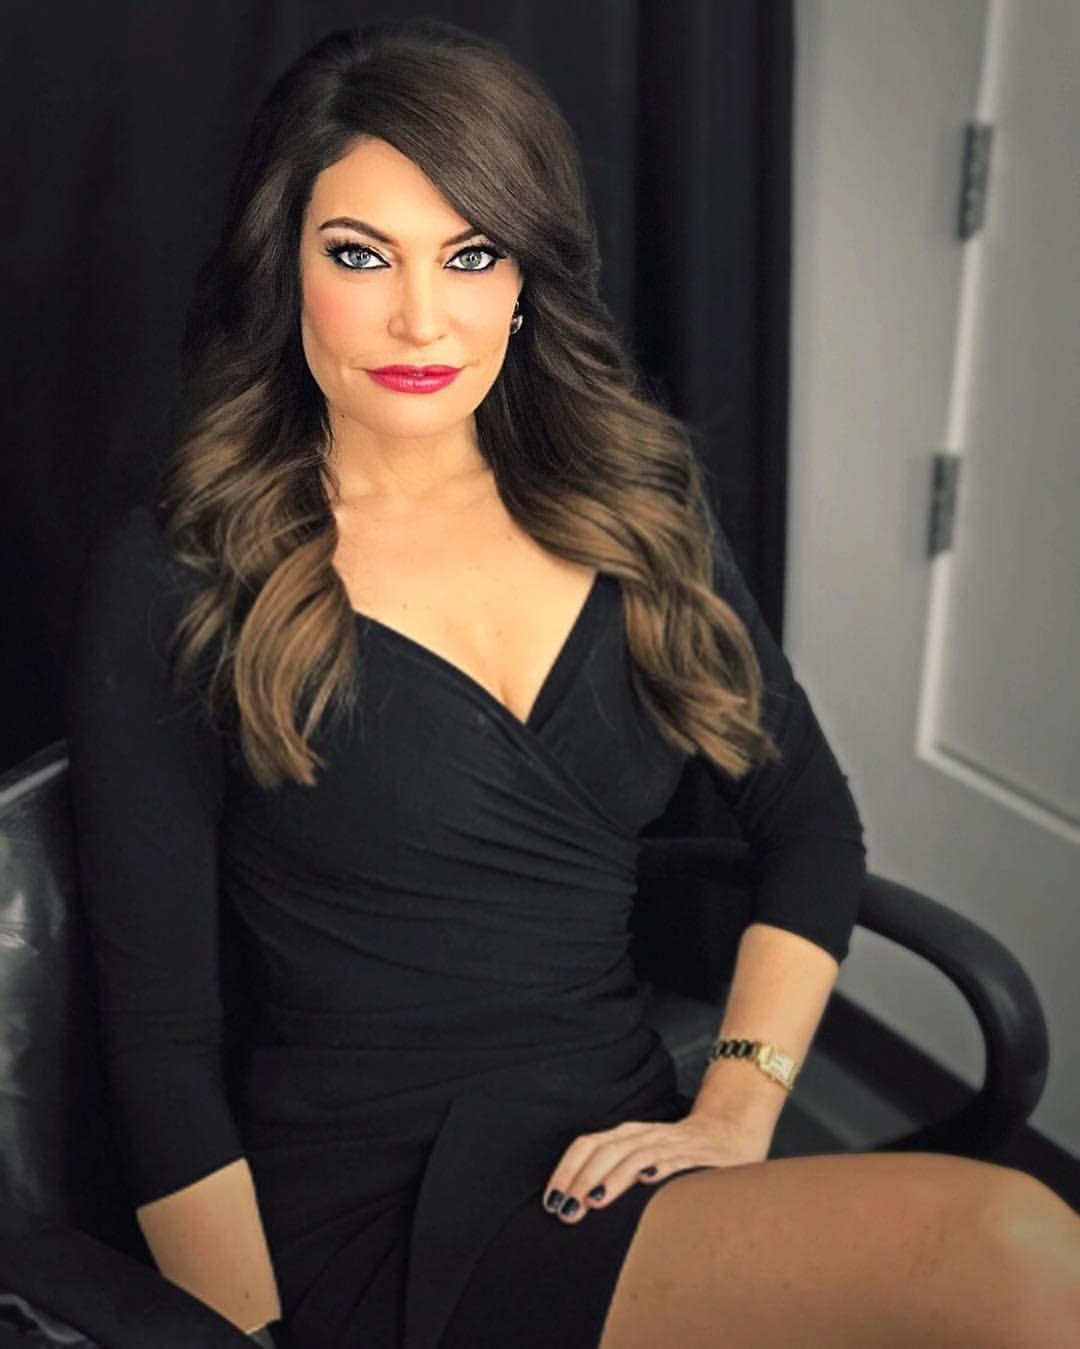 Gorgeous Kimberly Guilfoyle is a famous Fox News anchor